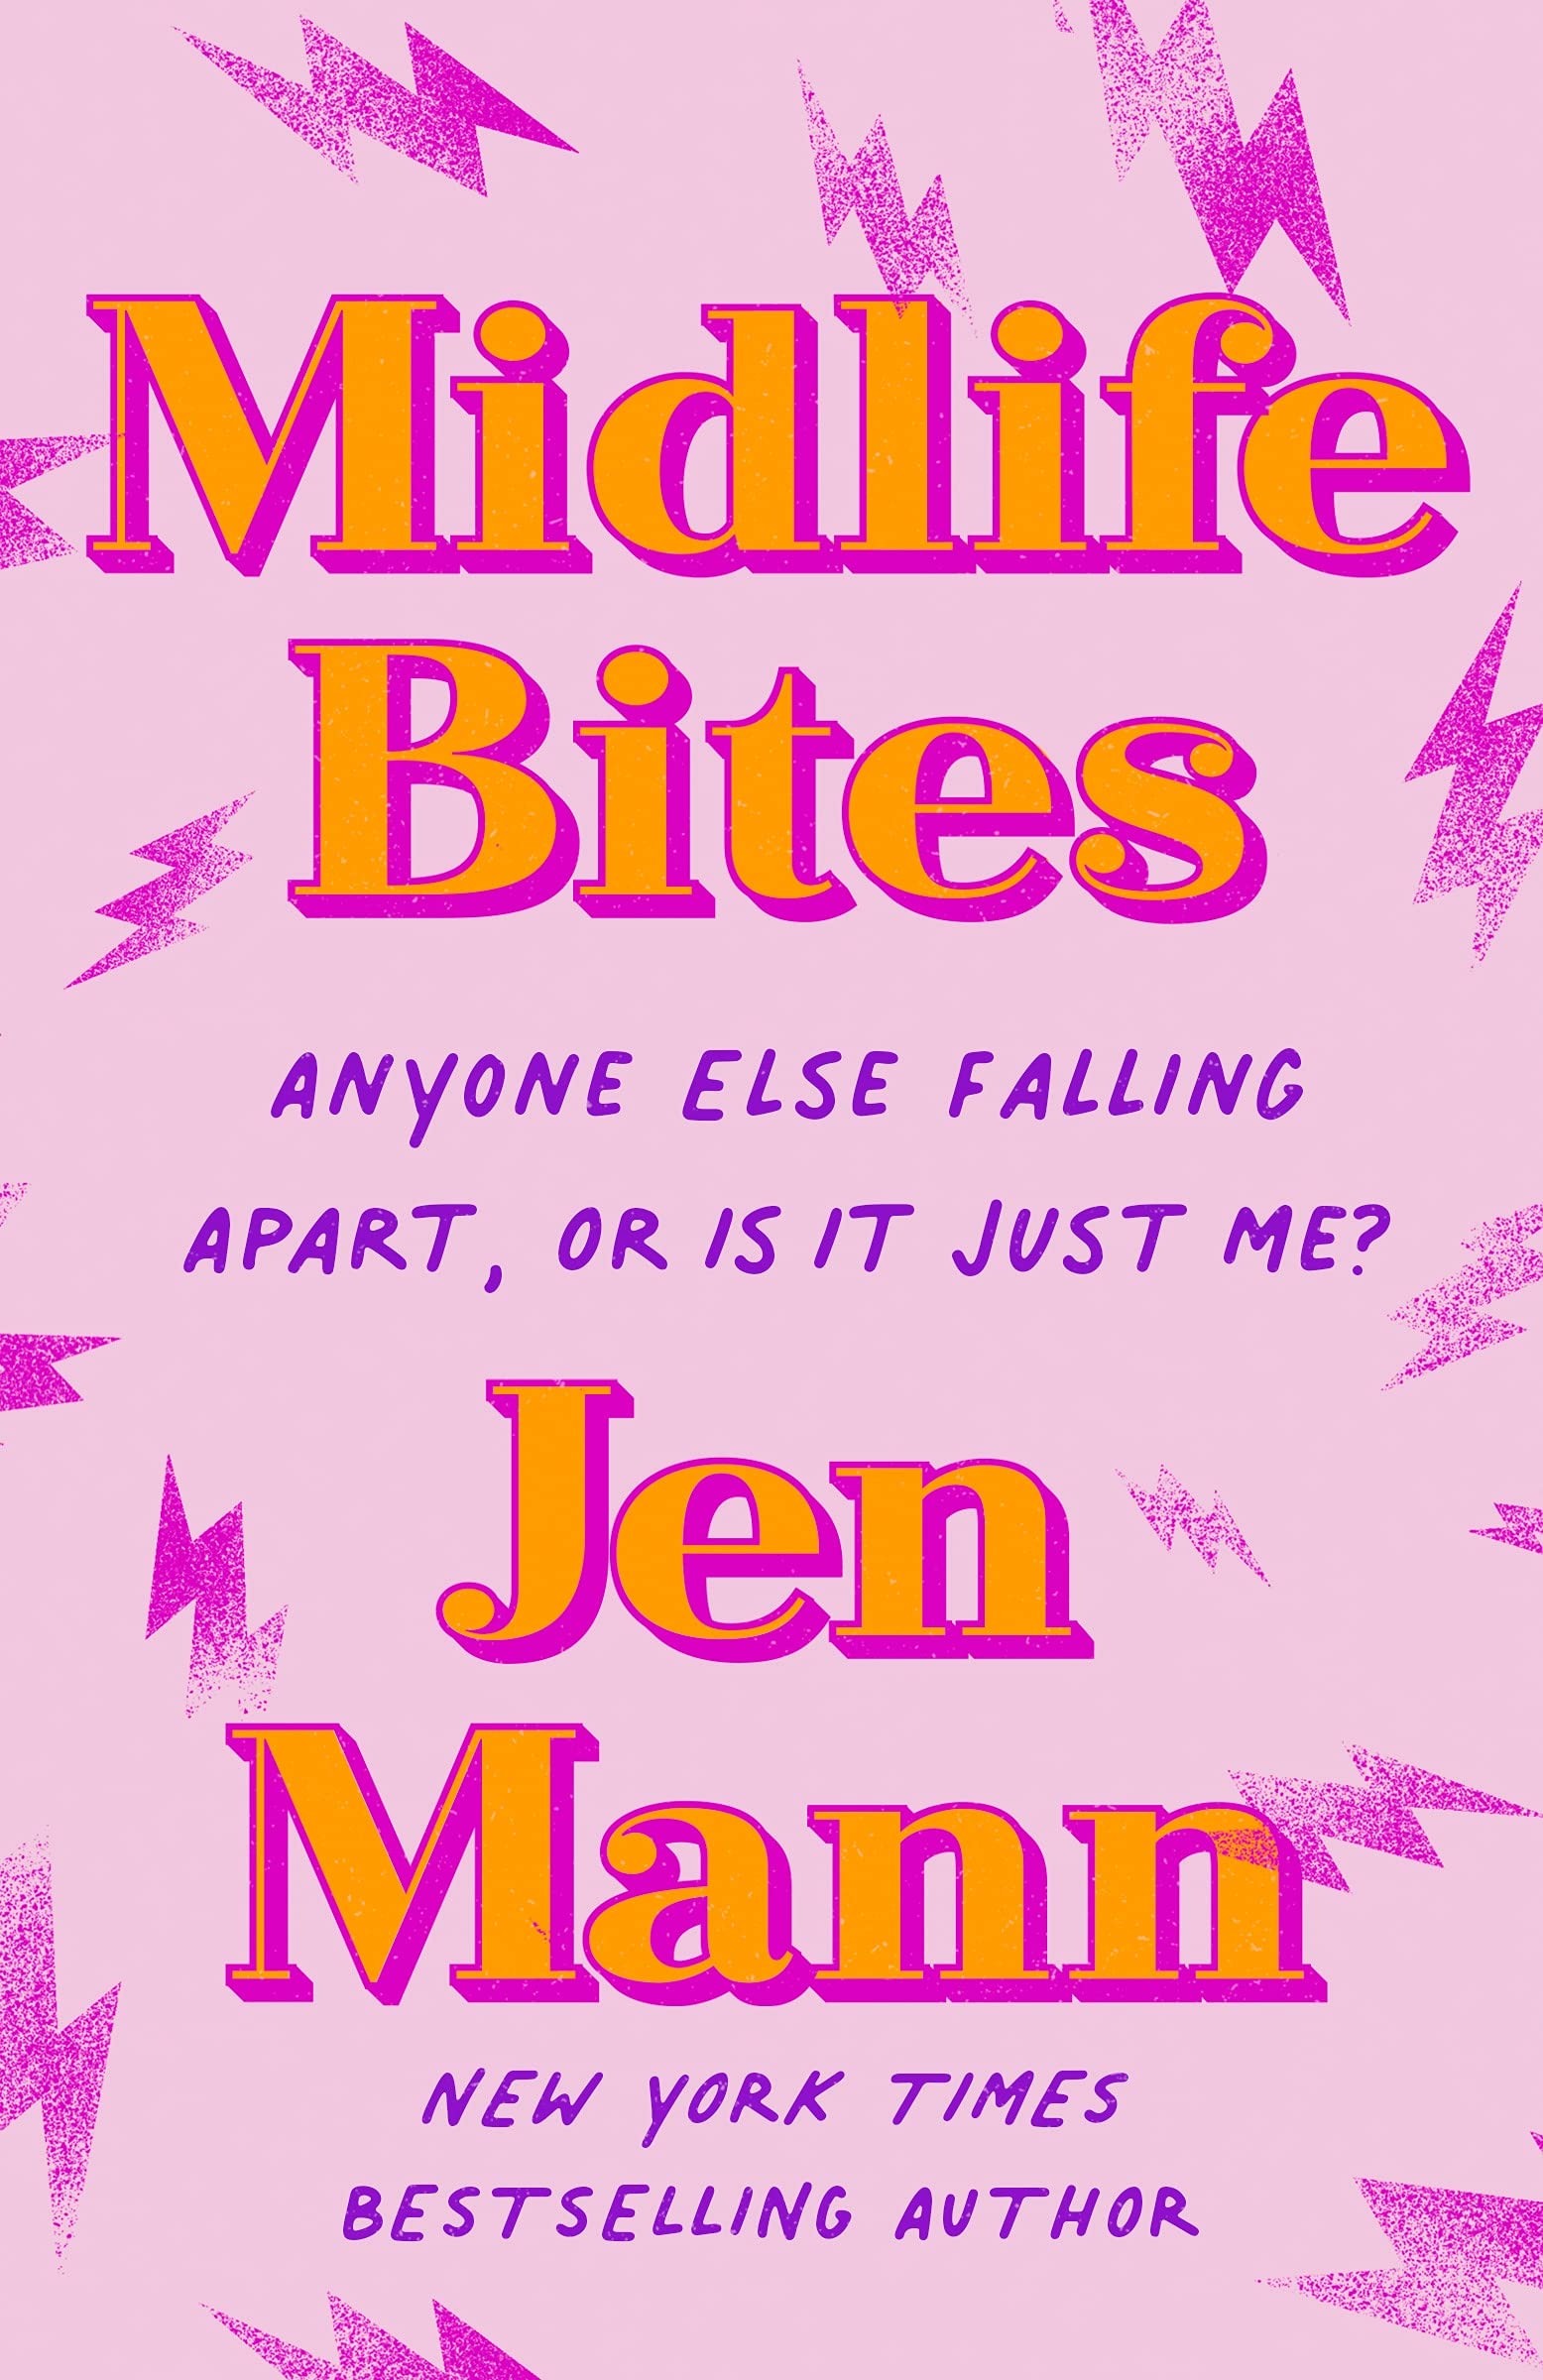 Midlife Bites: Anyone Else Falling Apart, Or Is It Just Me? by jen mann